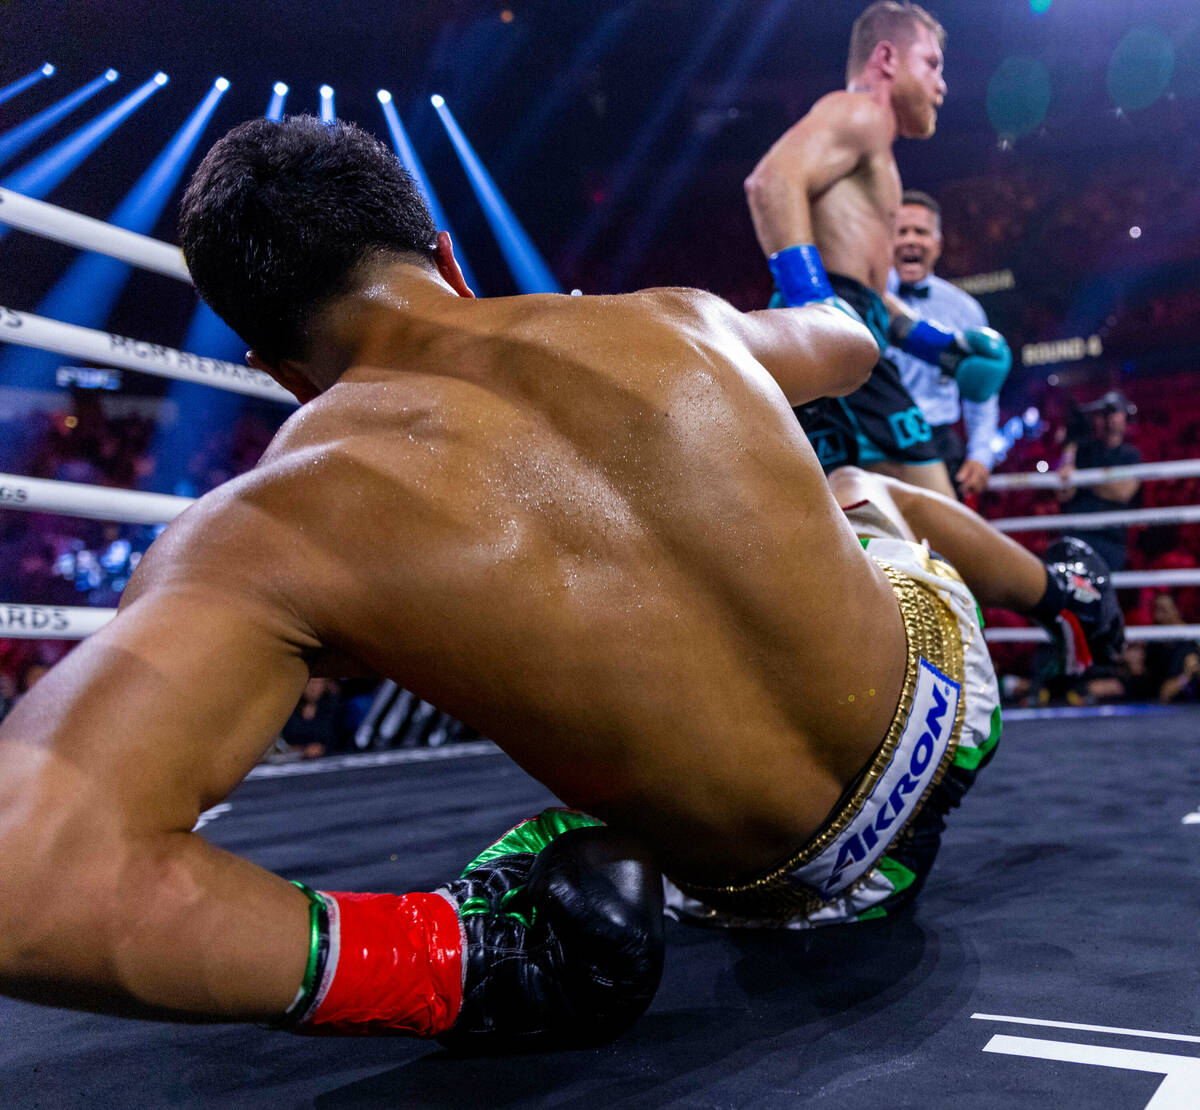 Canelo Alvarez connects with a punch to the ribs of Jaime Munguia sending him to the canvas dur ...